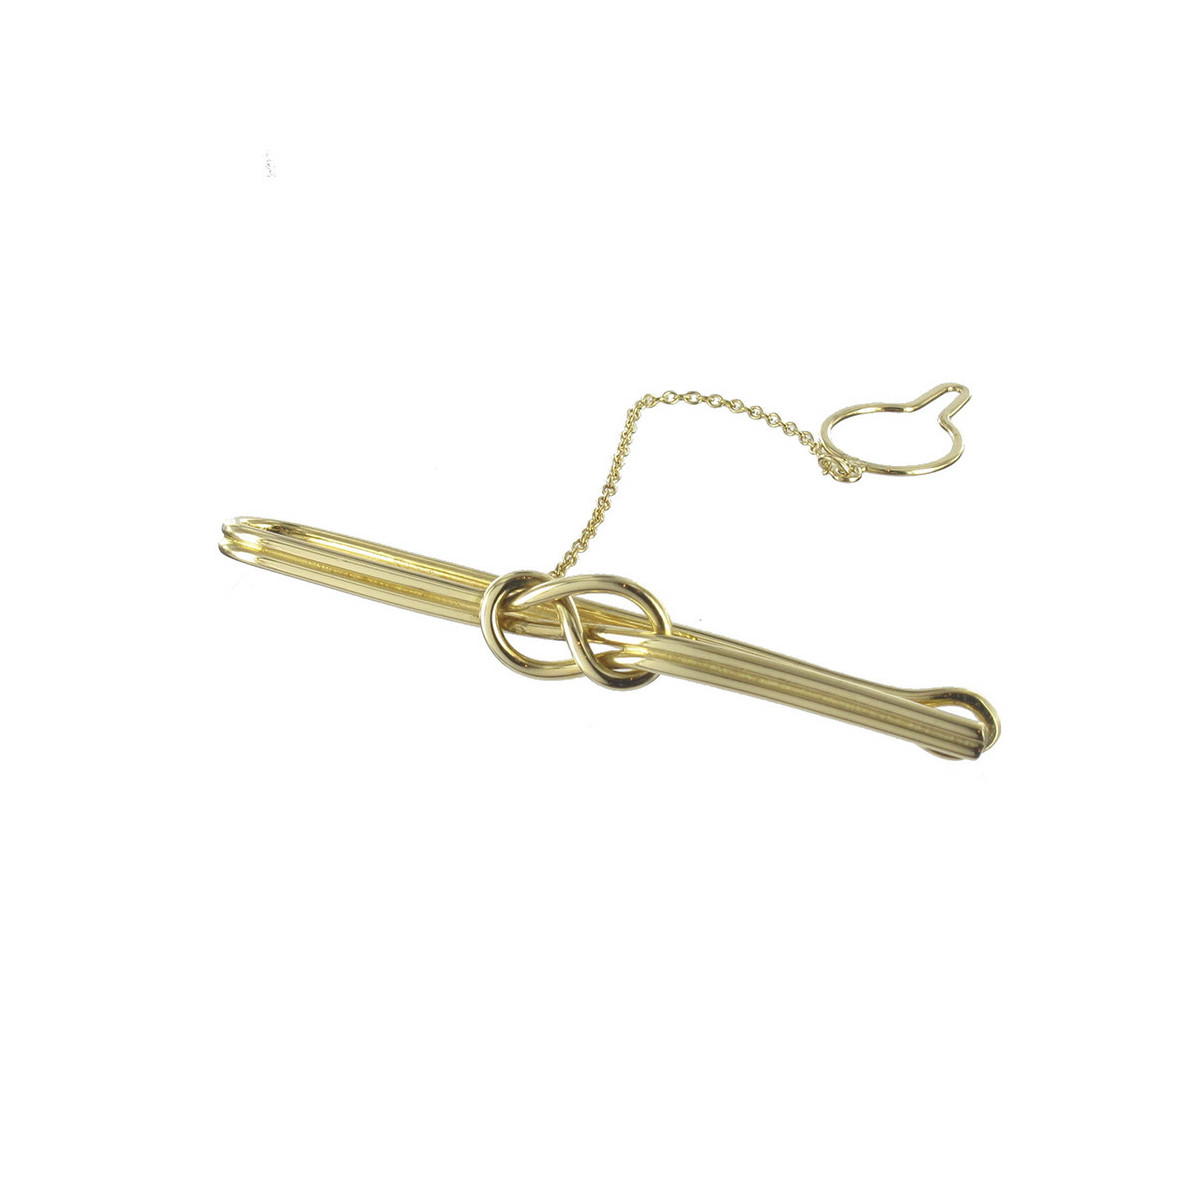 GOLD TIE CLIP WITH KNOT